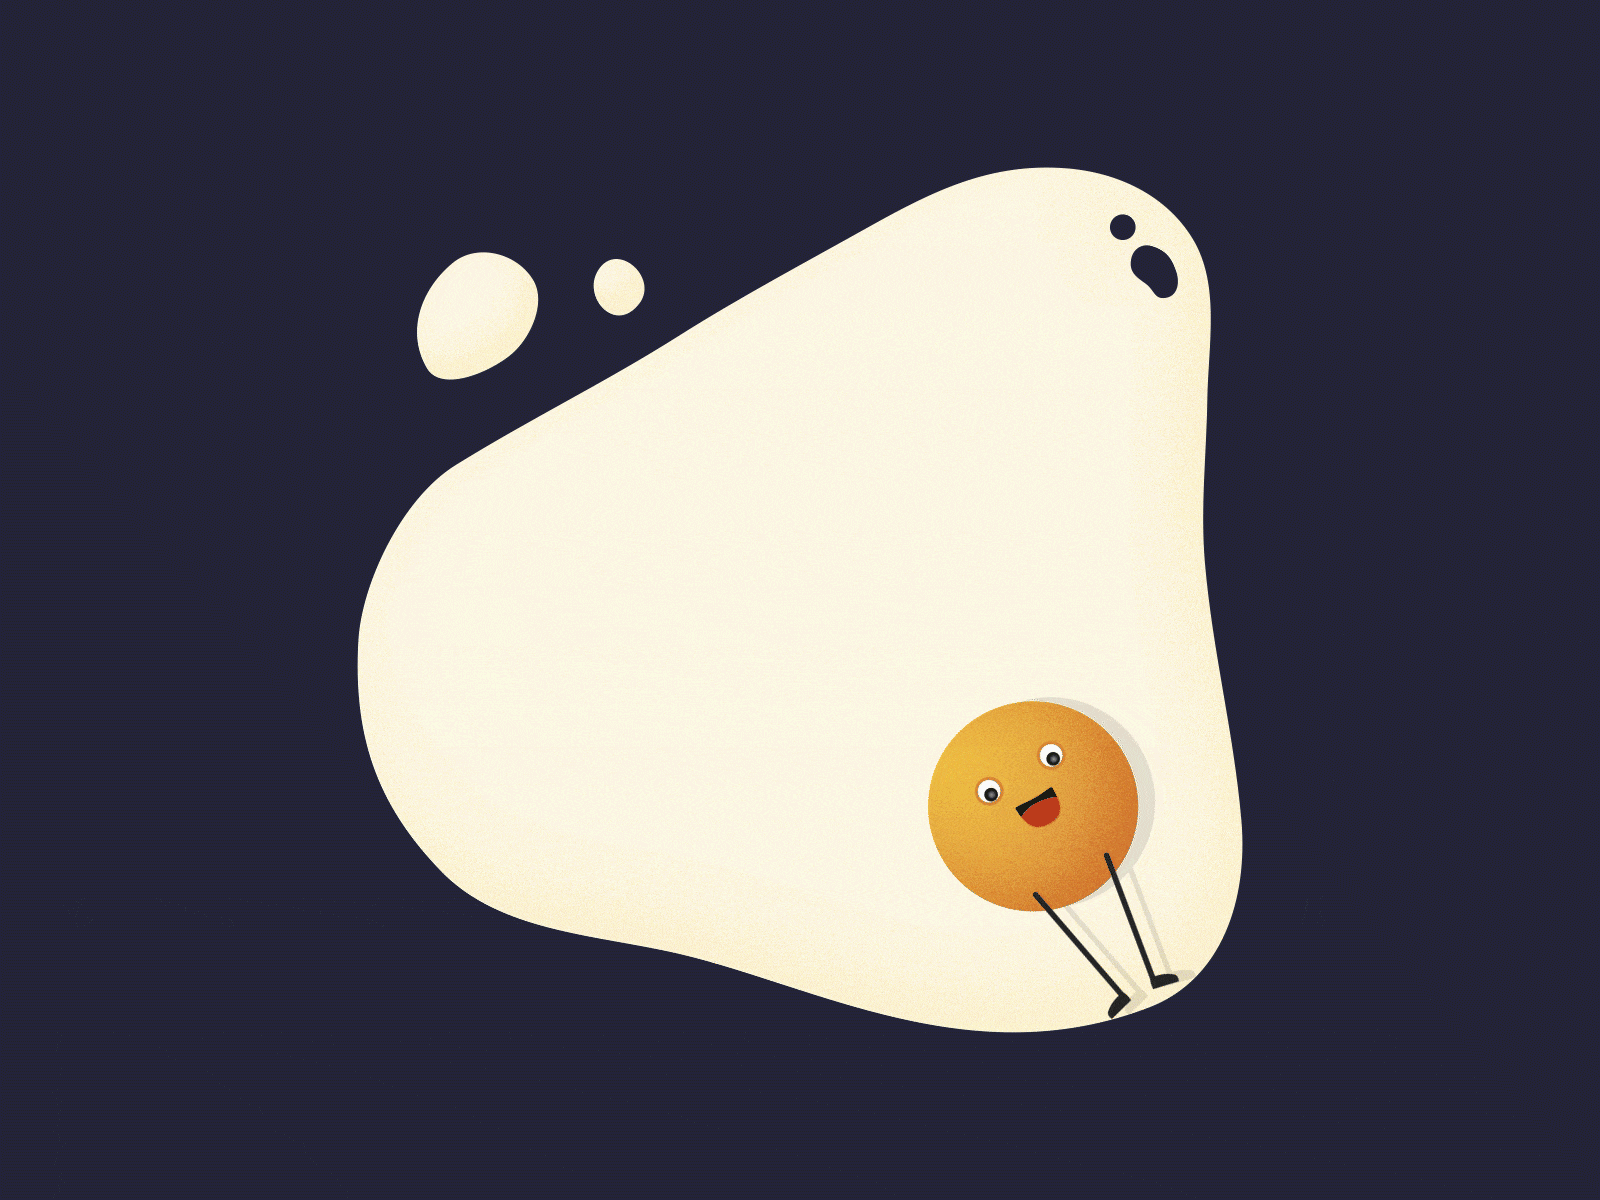 Egg Animation Series [2] 2d aftereffects animation bliss character creative design egg gradient happy illustration minimal